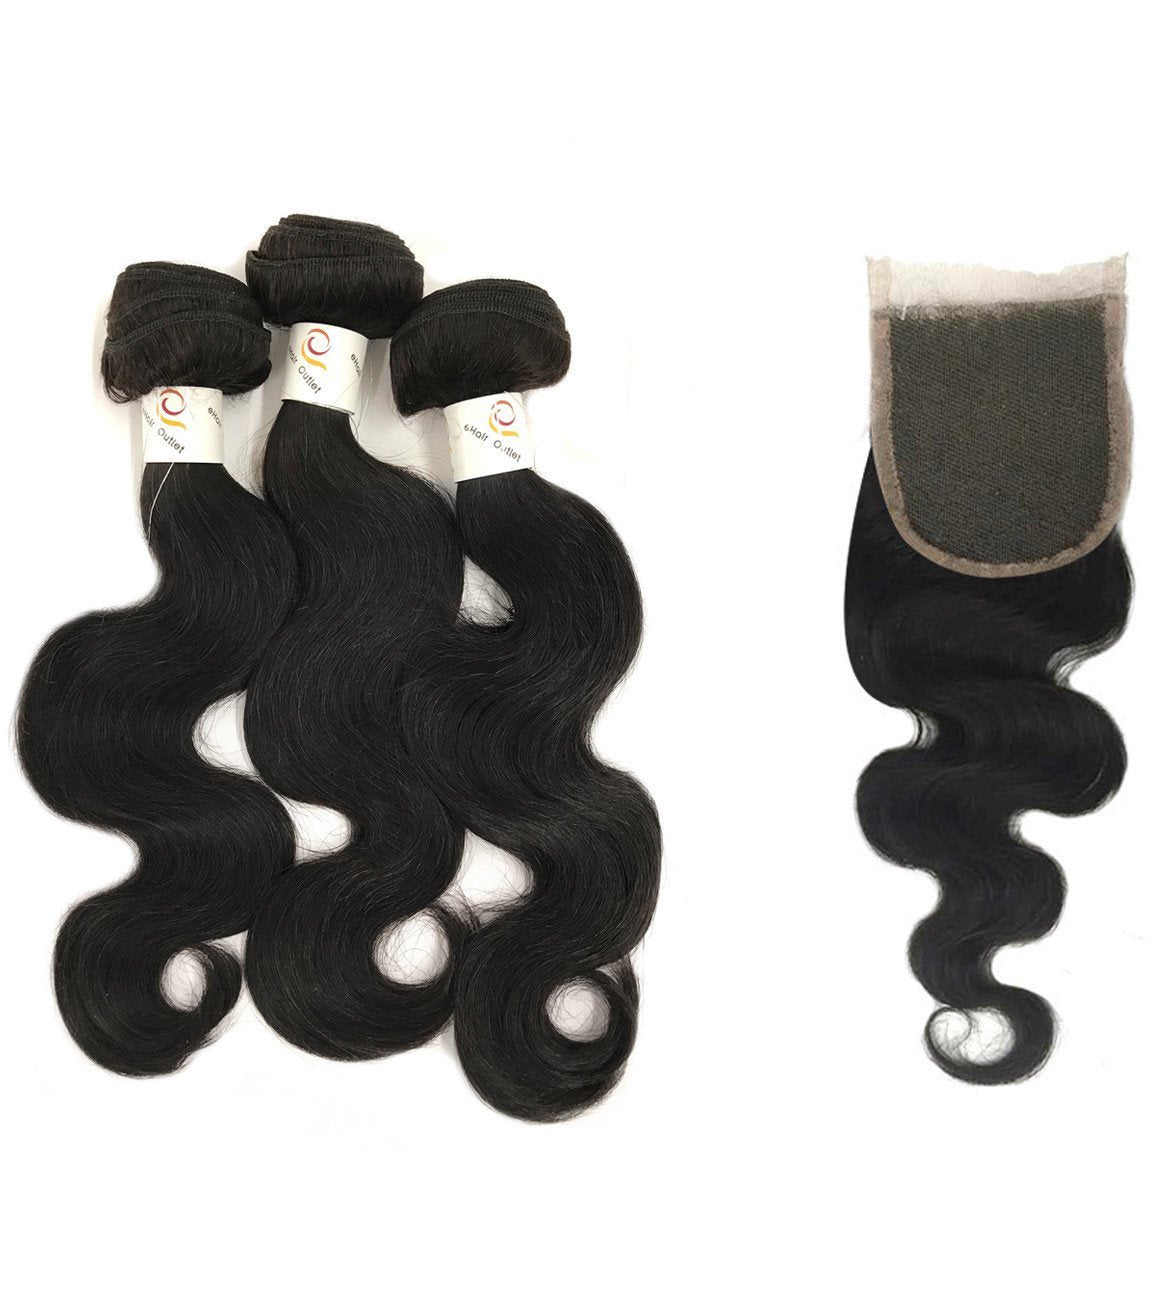 Load image into Gallery viewer, 5A Brazilian 3 Bundle Set Body Wave Virgin Human Hair Extension w/ Remy Lace Closure - eHair Outlet
